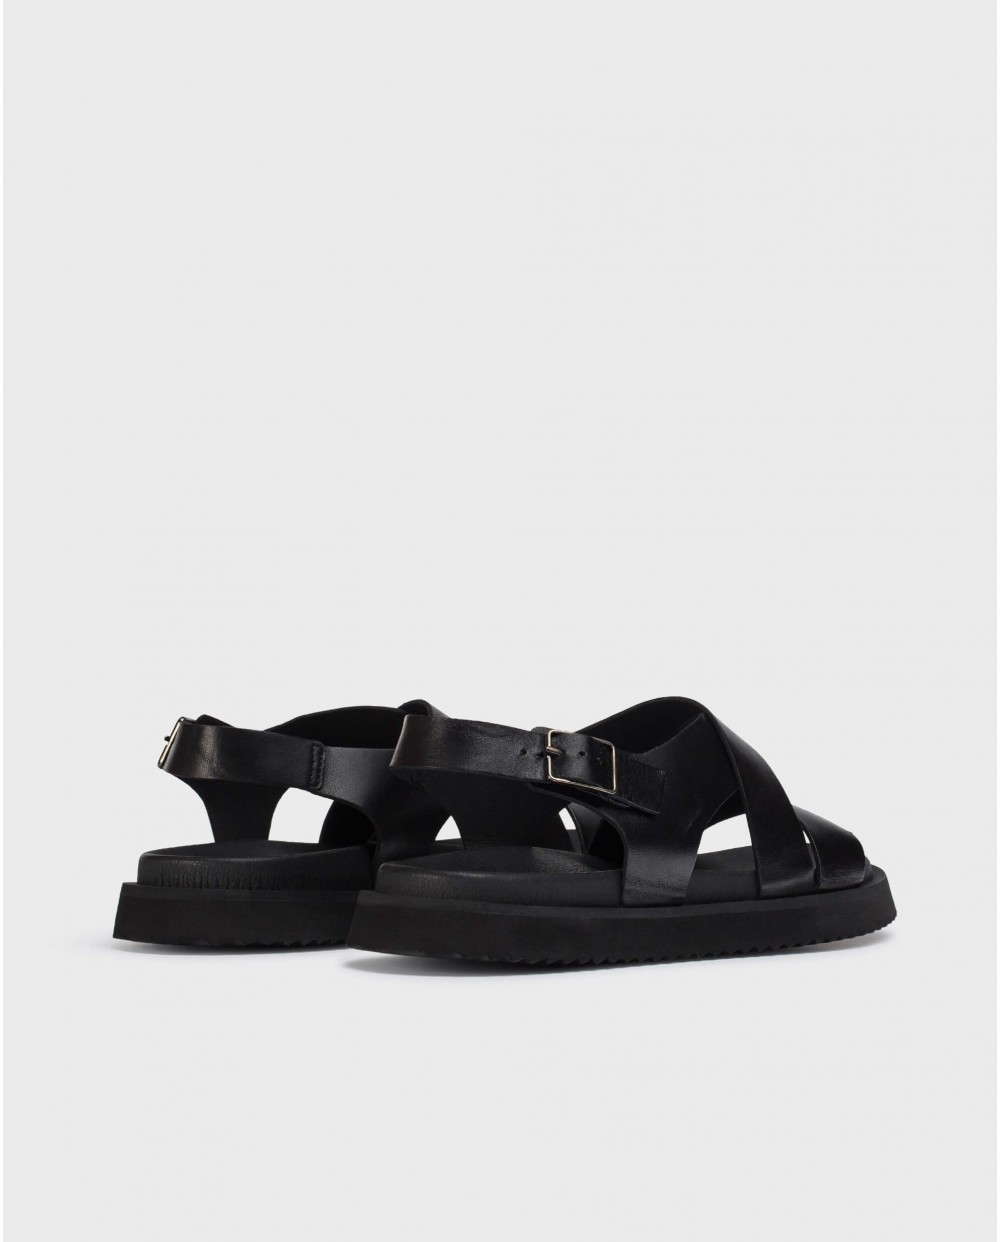 Wonders-Ready to wear-Leather sandal with cross over straps